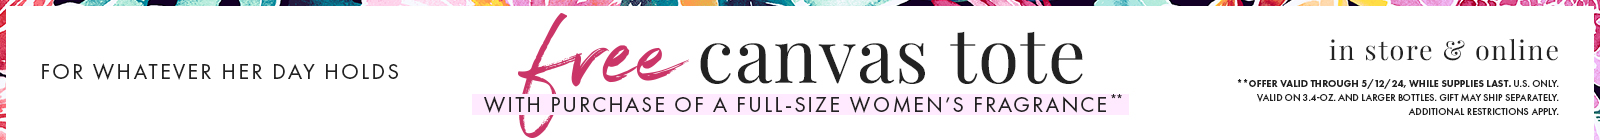 FREE CANVAS TOTE with your purchase of select women's fragrances**